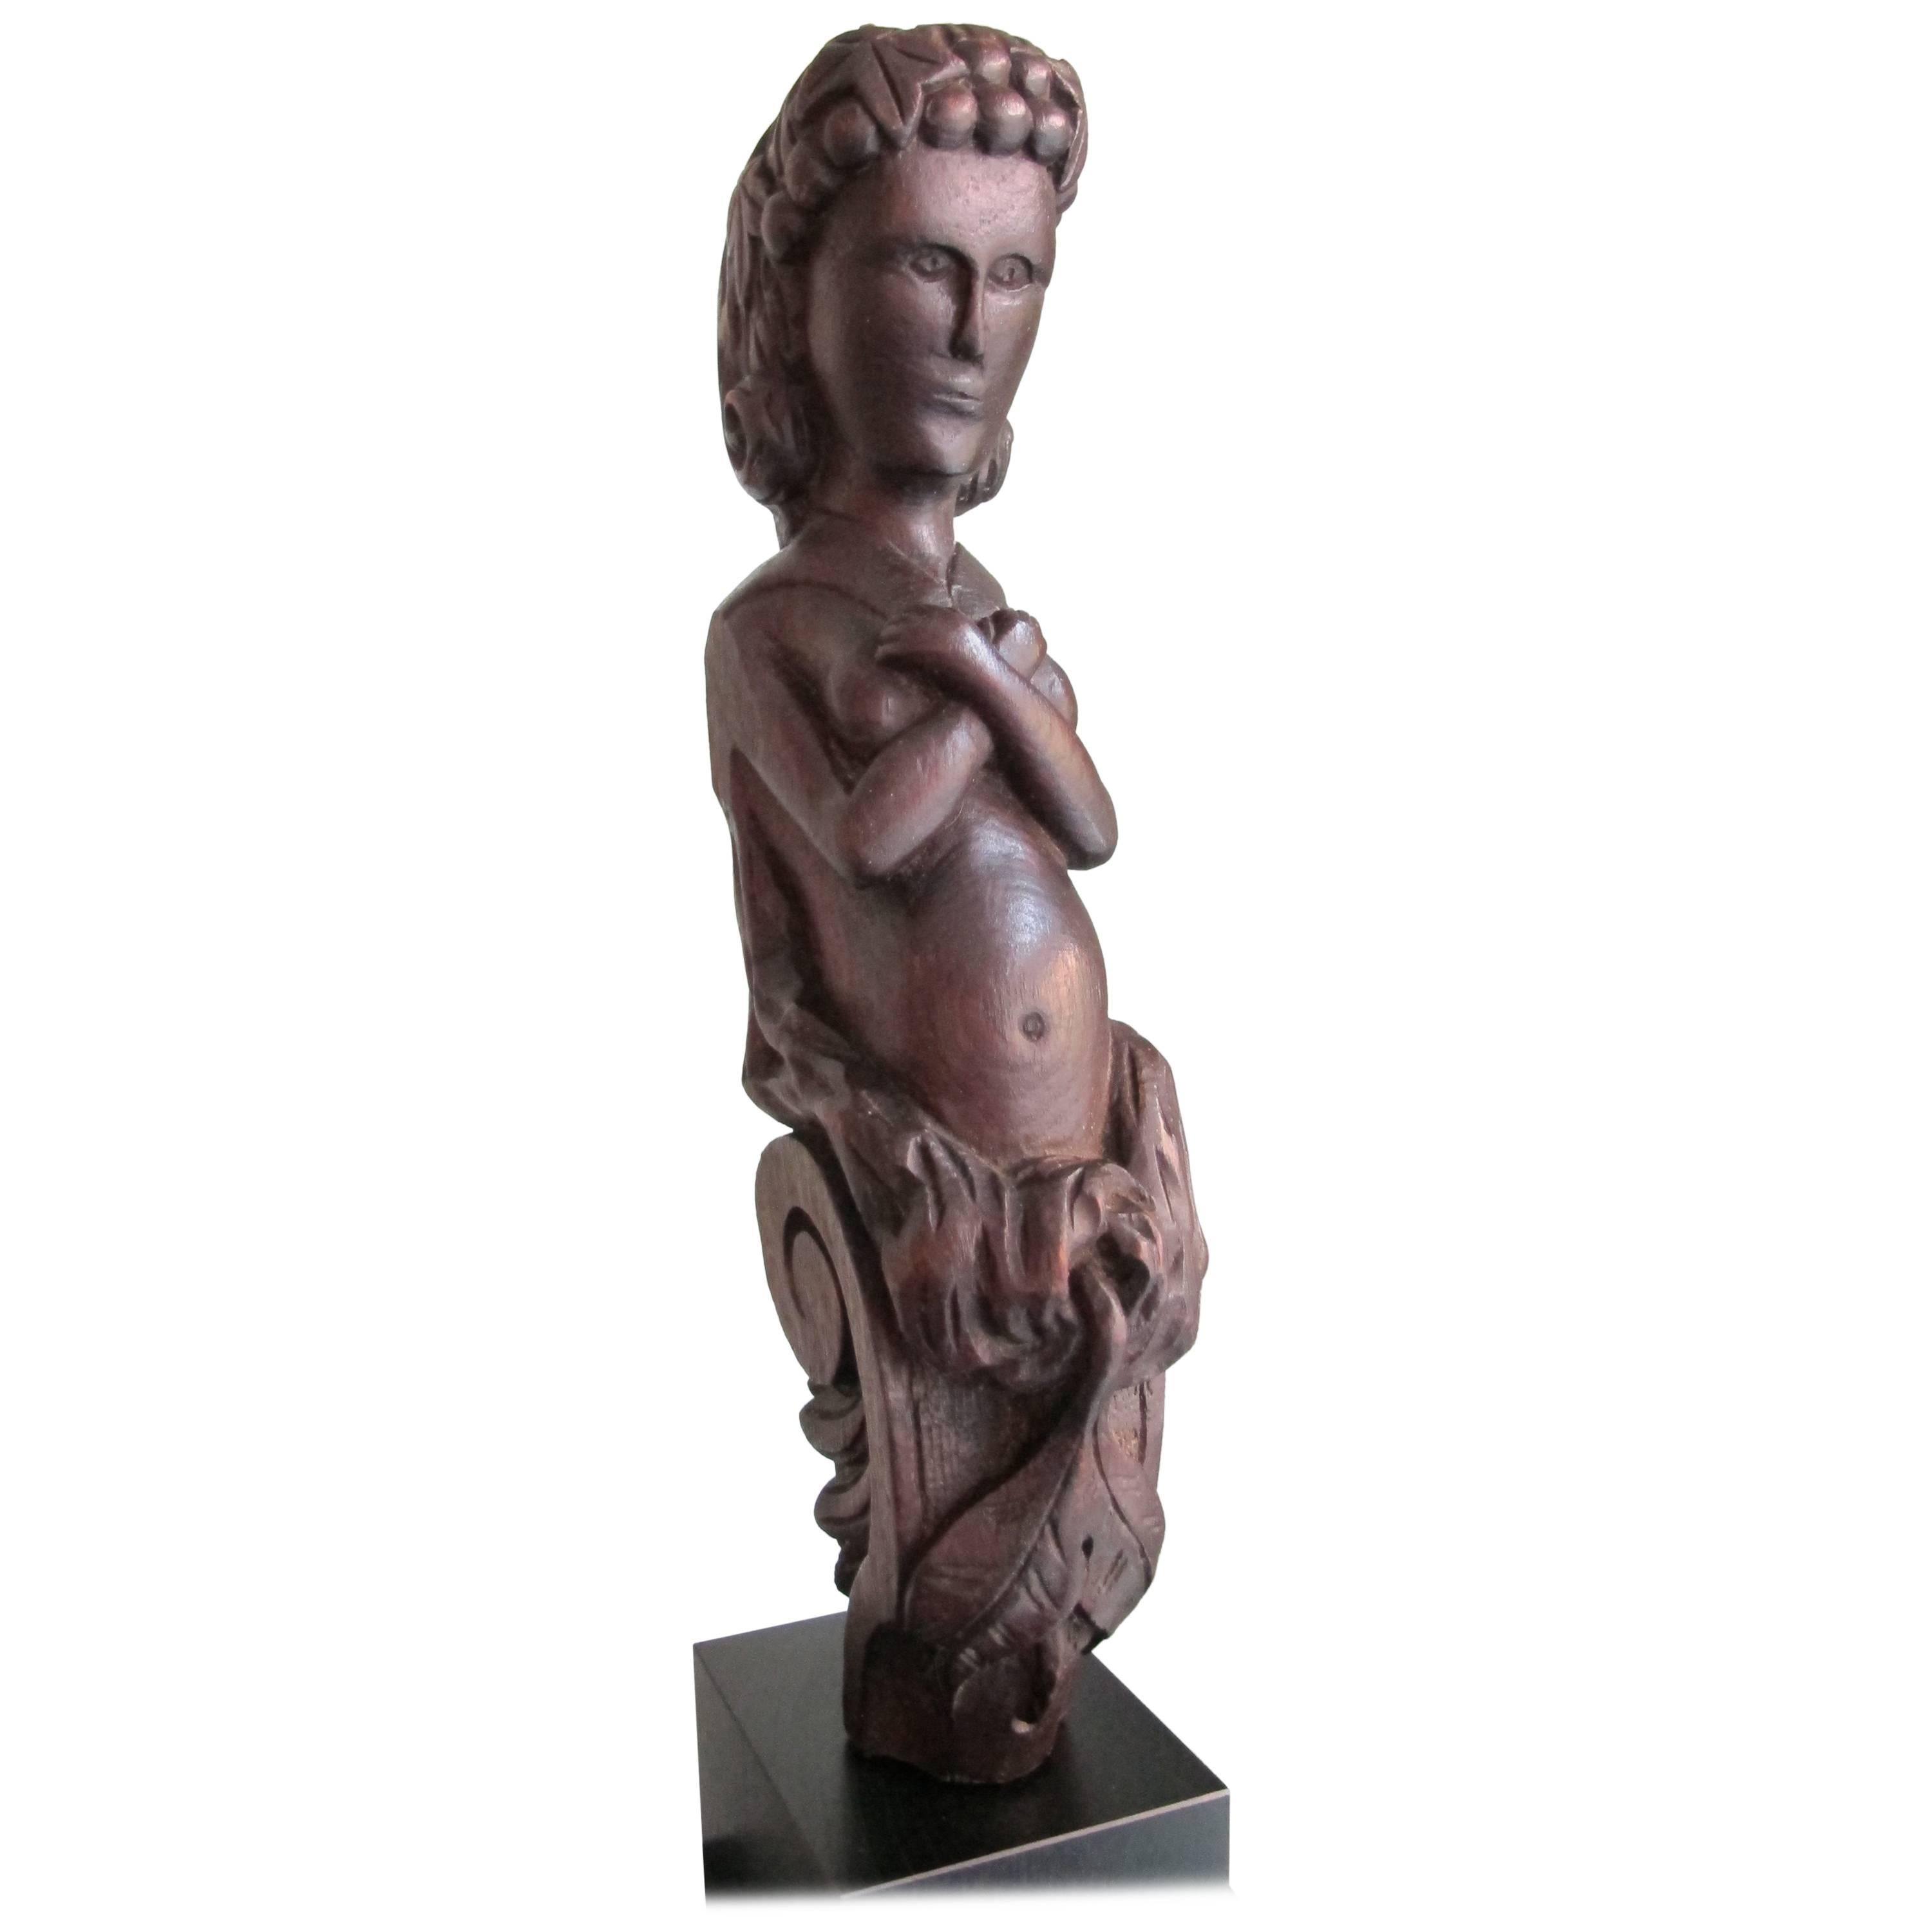 Carved Wood Caryatid Figure with Arms Crossed over Breasts For Sale